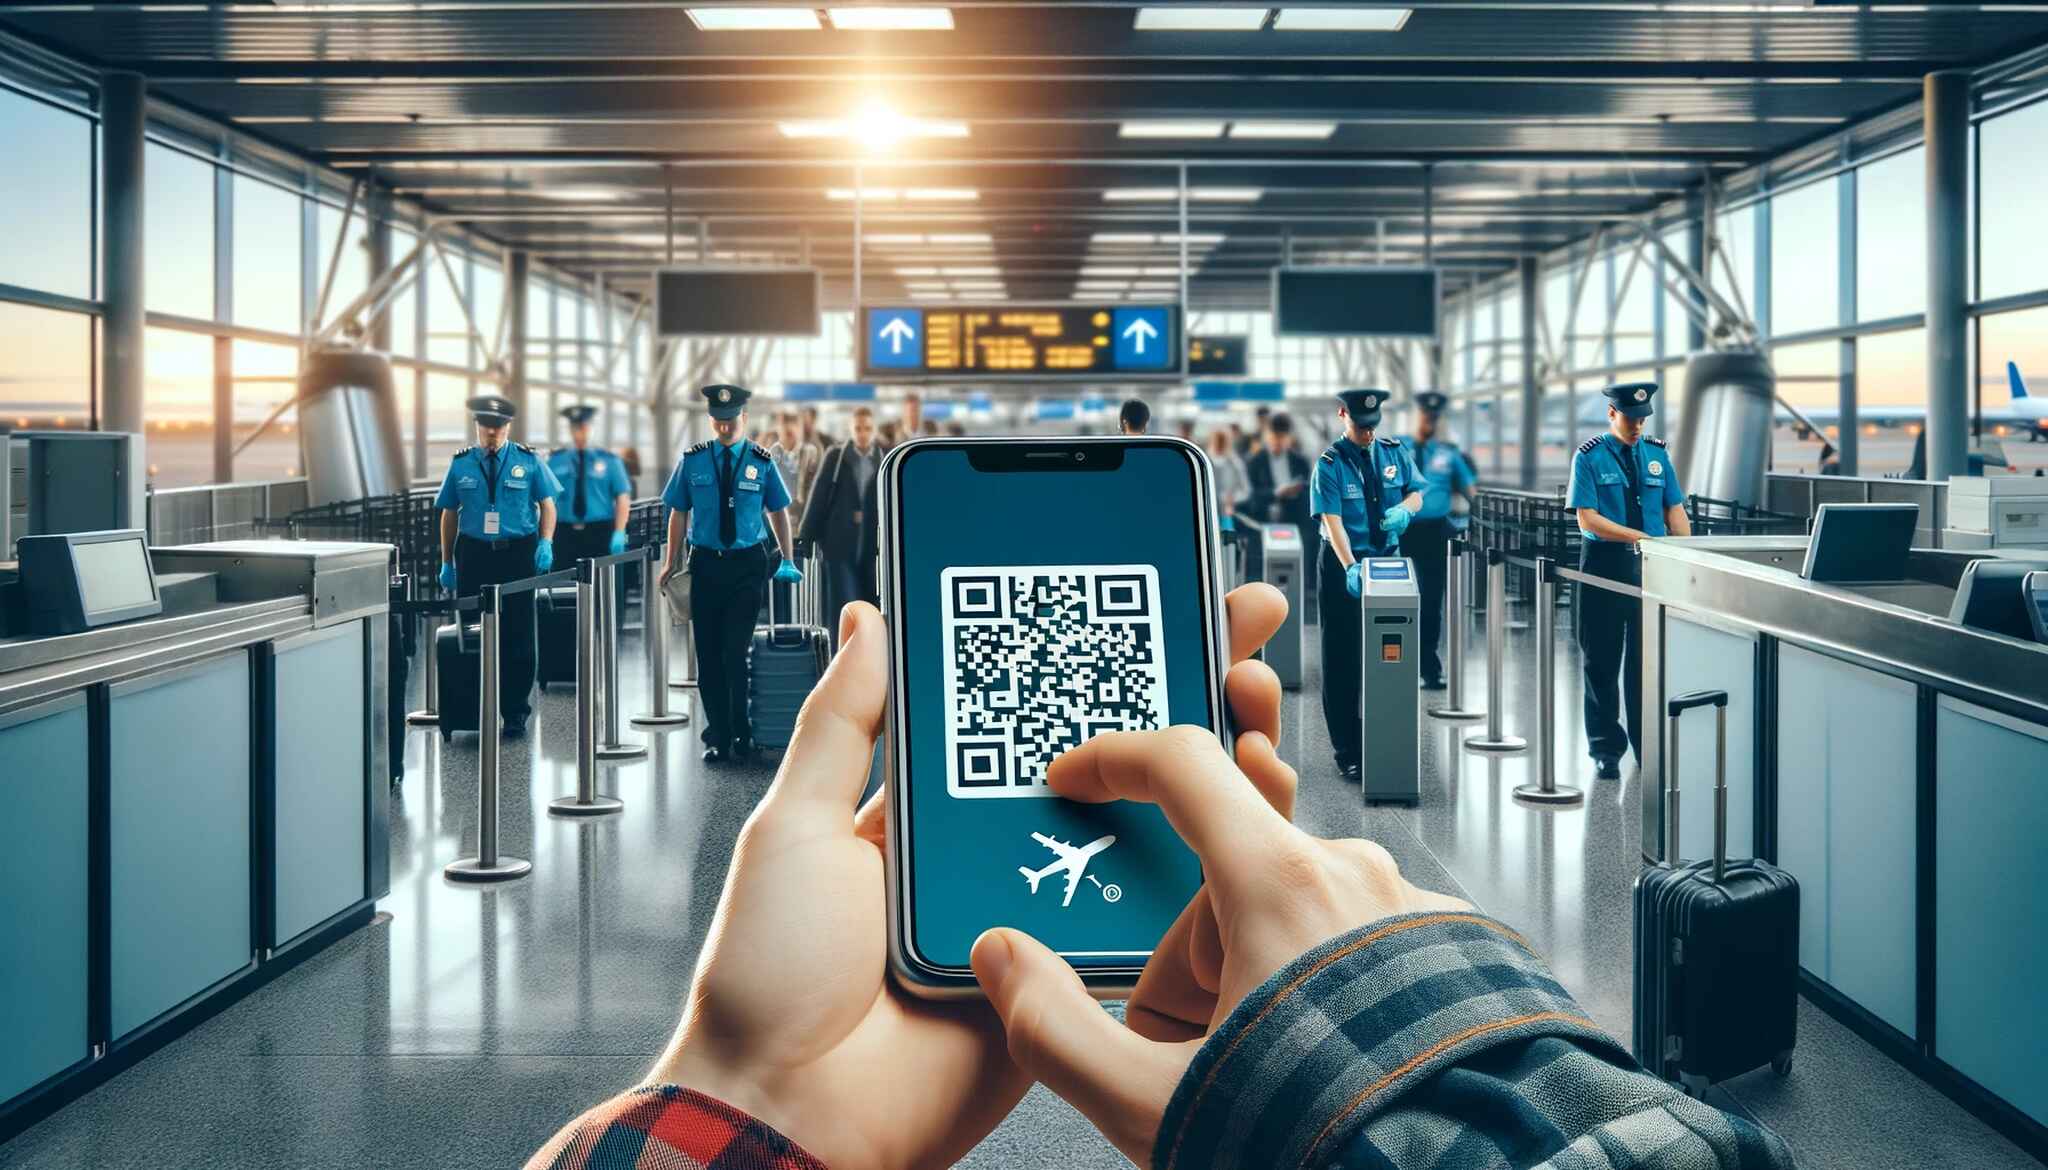  A traveler standing at an airport security checkpoint, holding a smartphone displaying a QR code on the screen to a scanner